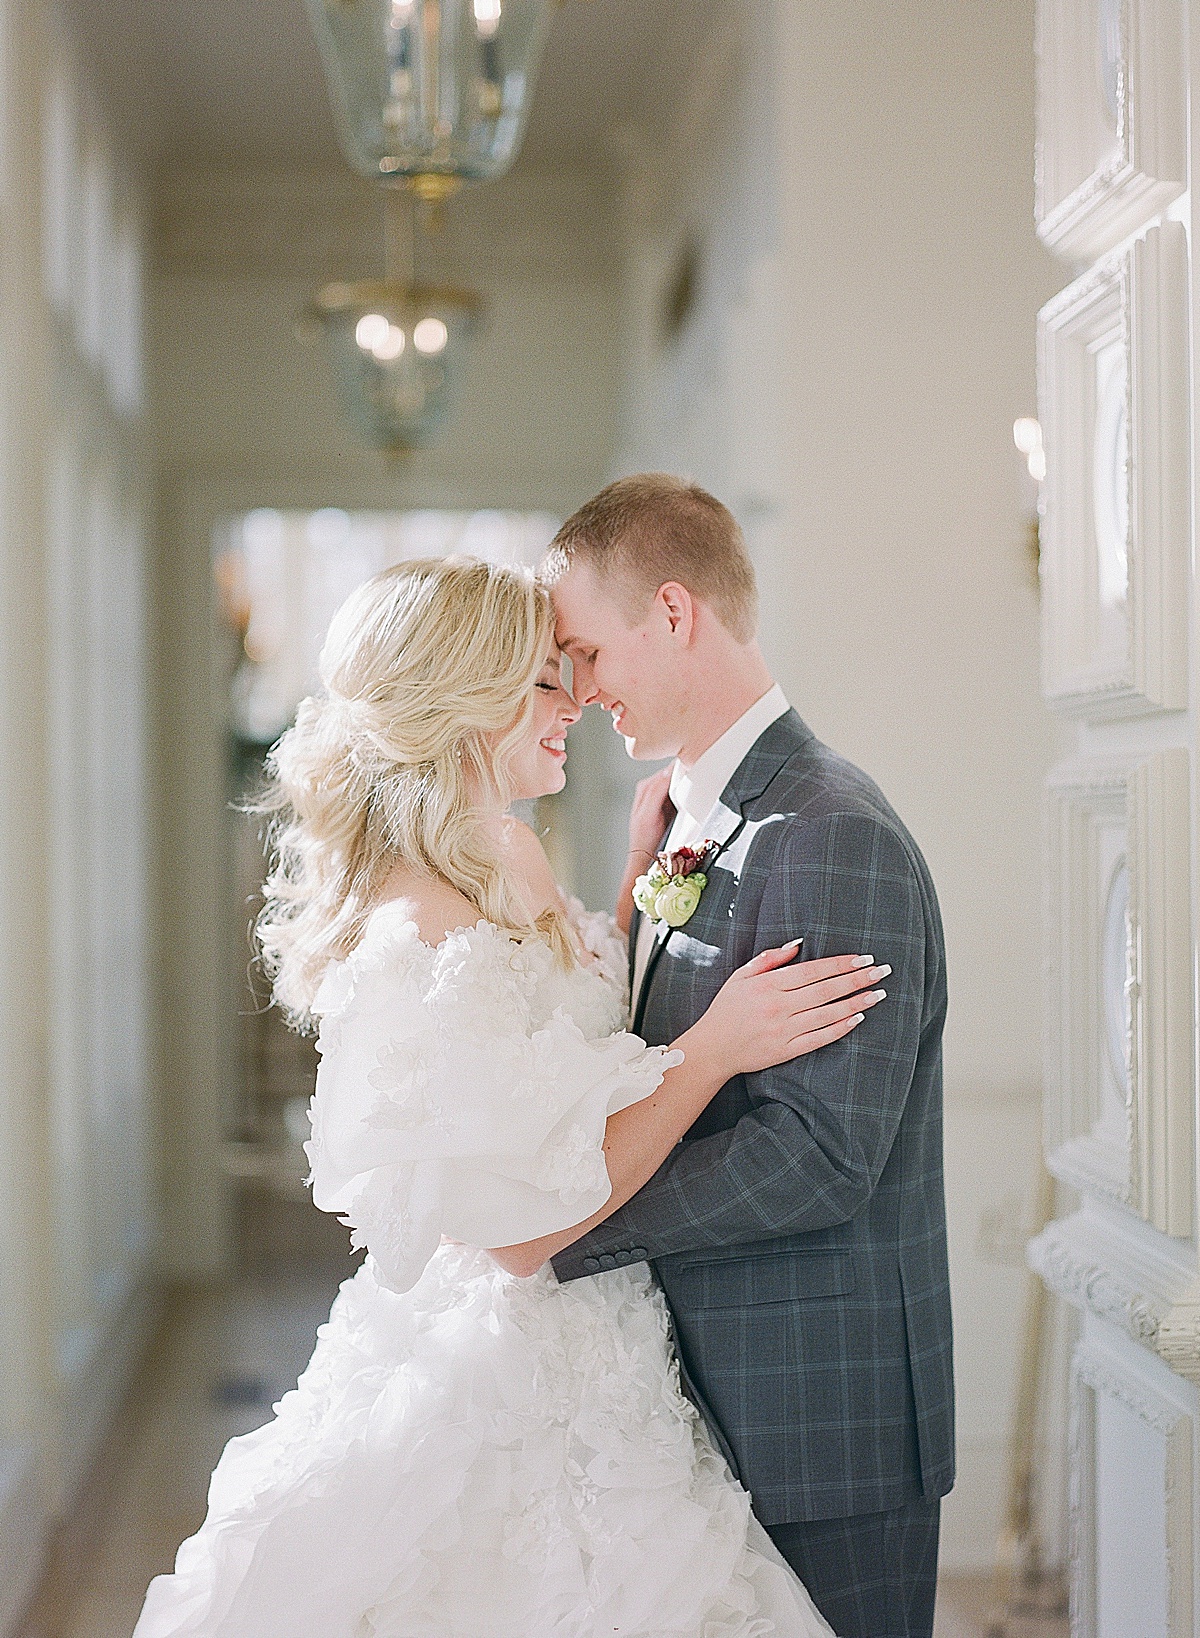 Bride and Groom Smiling Nose to Nose In Hallway Photo 